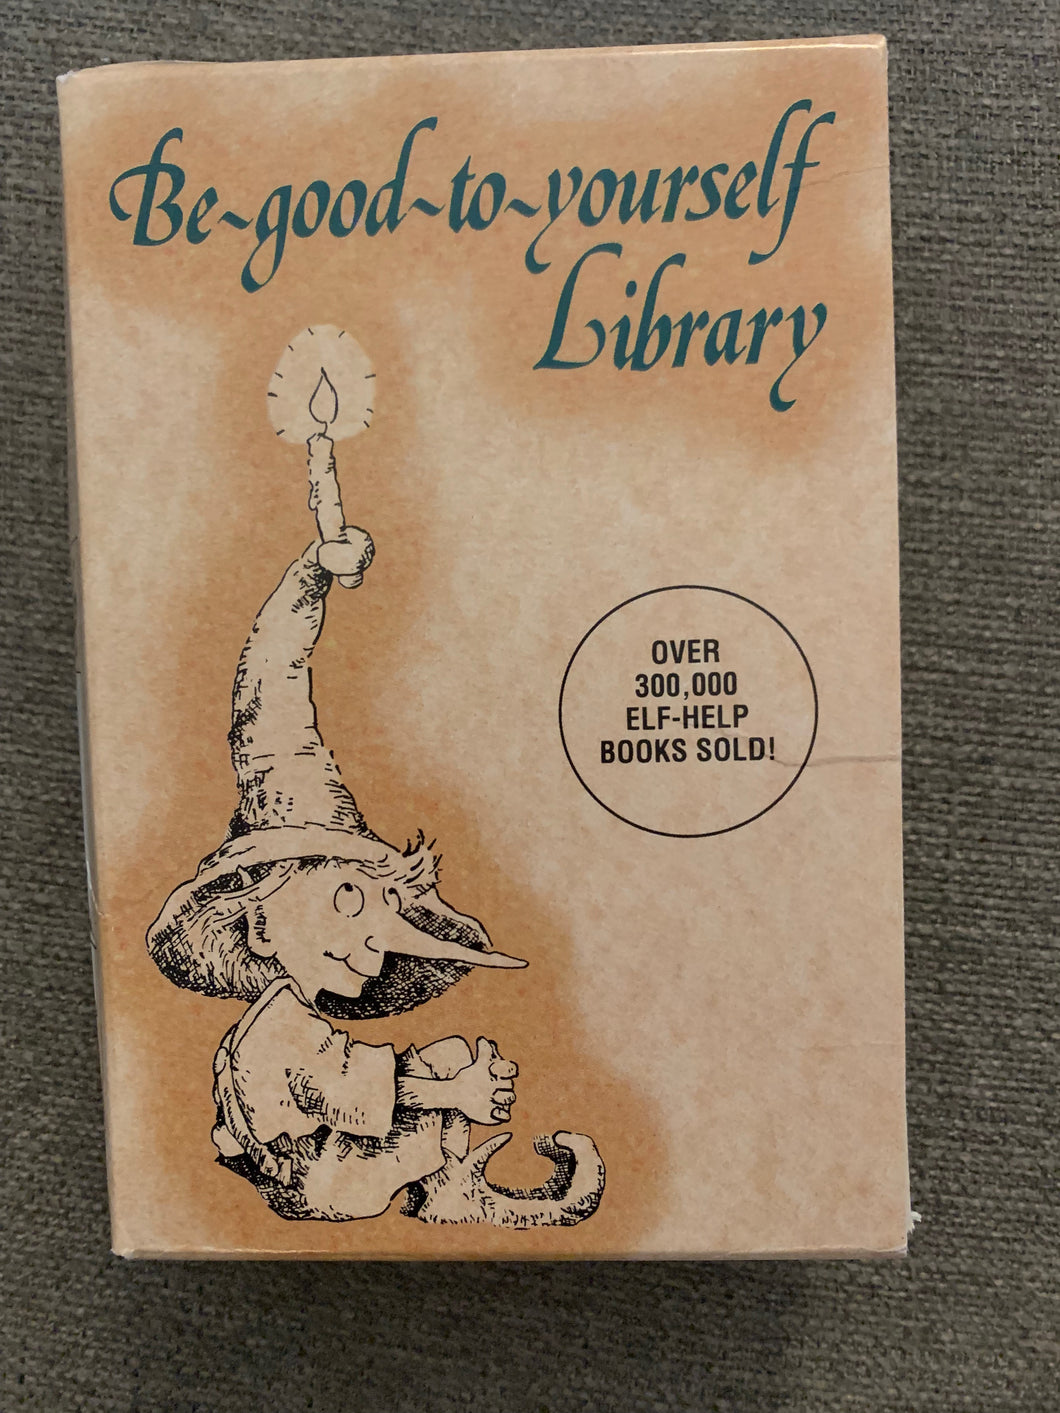 Be-Good-To-Yourself-Library by Cherry Hartman, Christine Adams, Linus Mundy